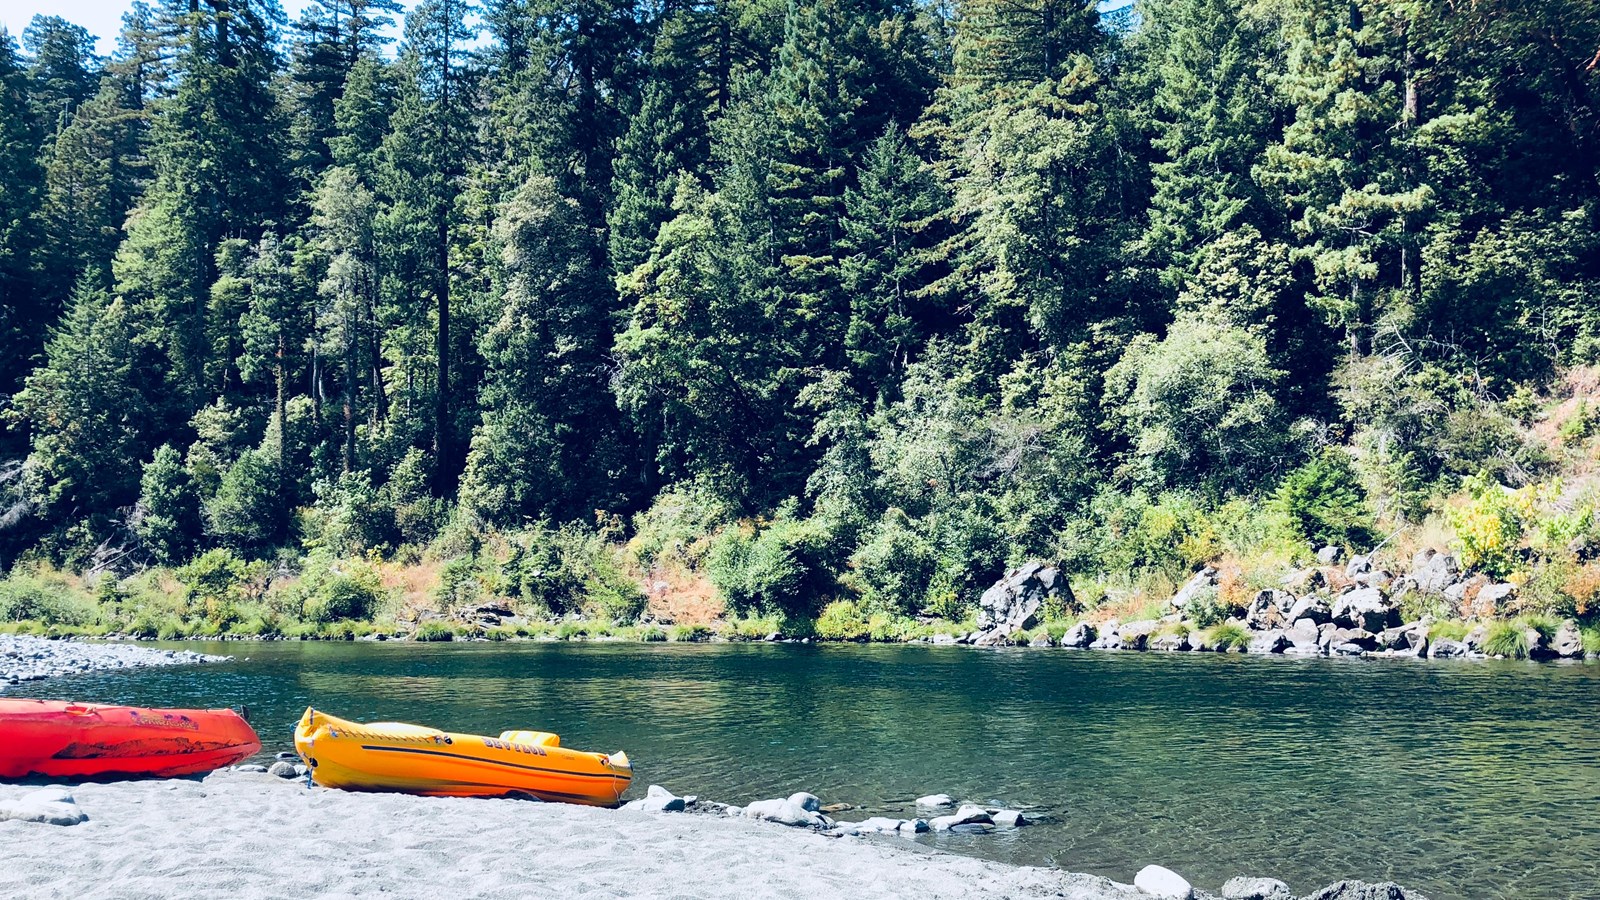 Two adults on a red inflatable kayak. Redwood forests cover the hills either side of a green river.